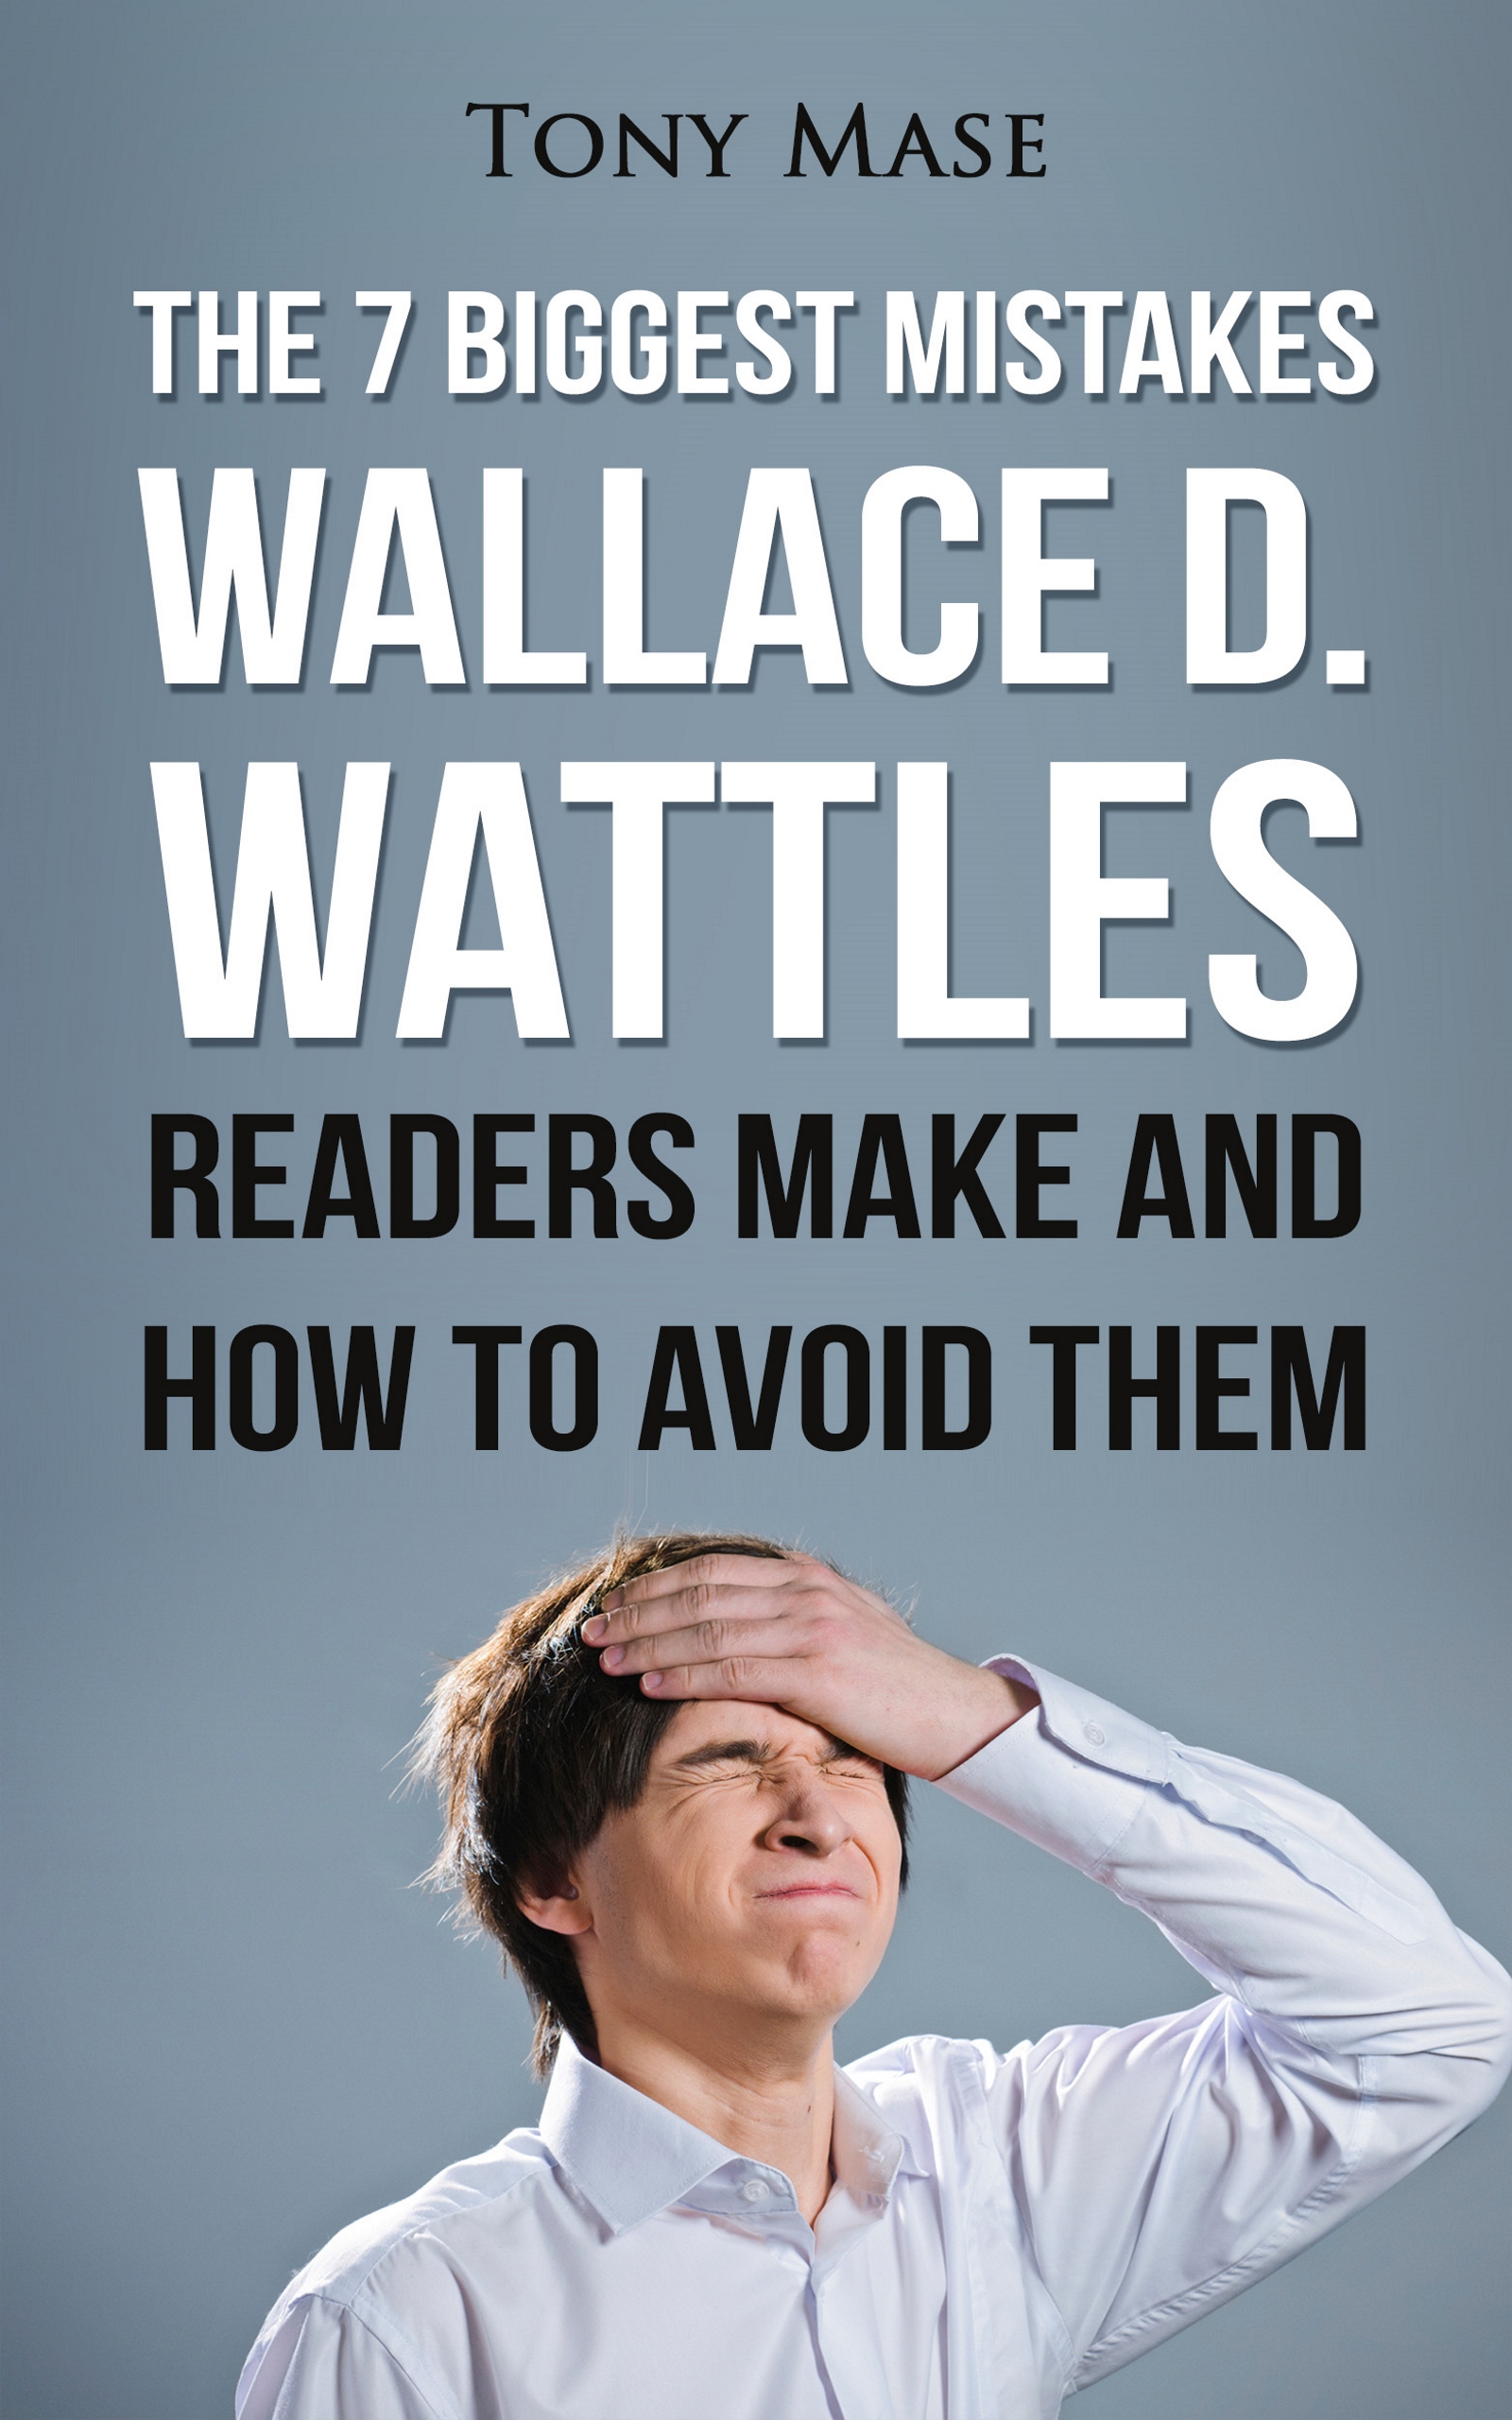 FREE: The 7 Biggest Mistakes Wallace D. Wattles Readers Make and How to Avoid Them by Tony Mase